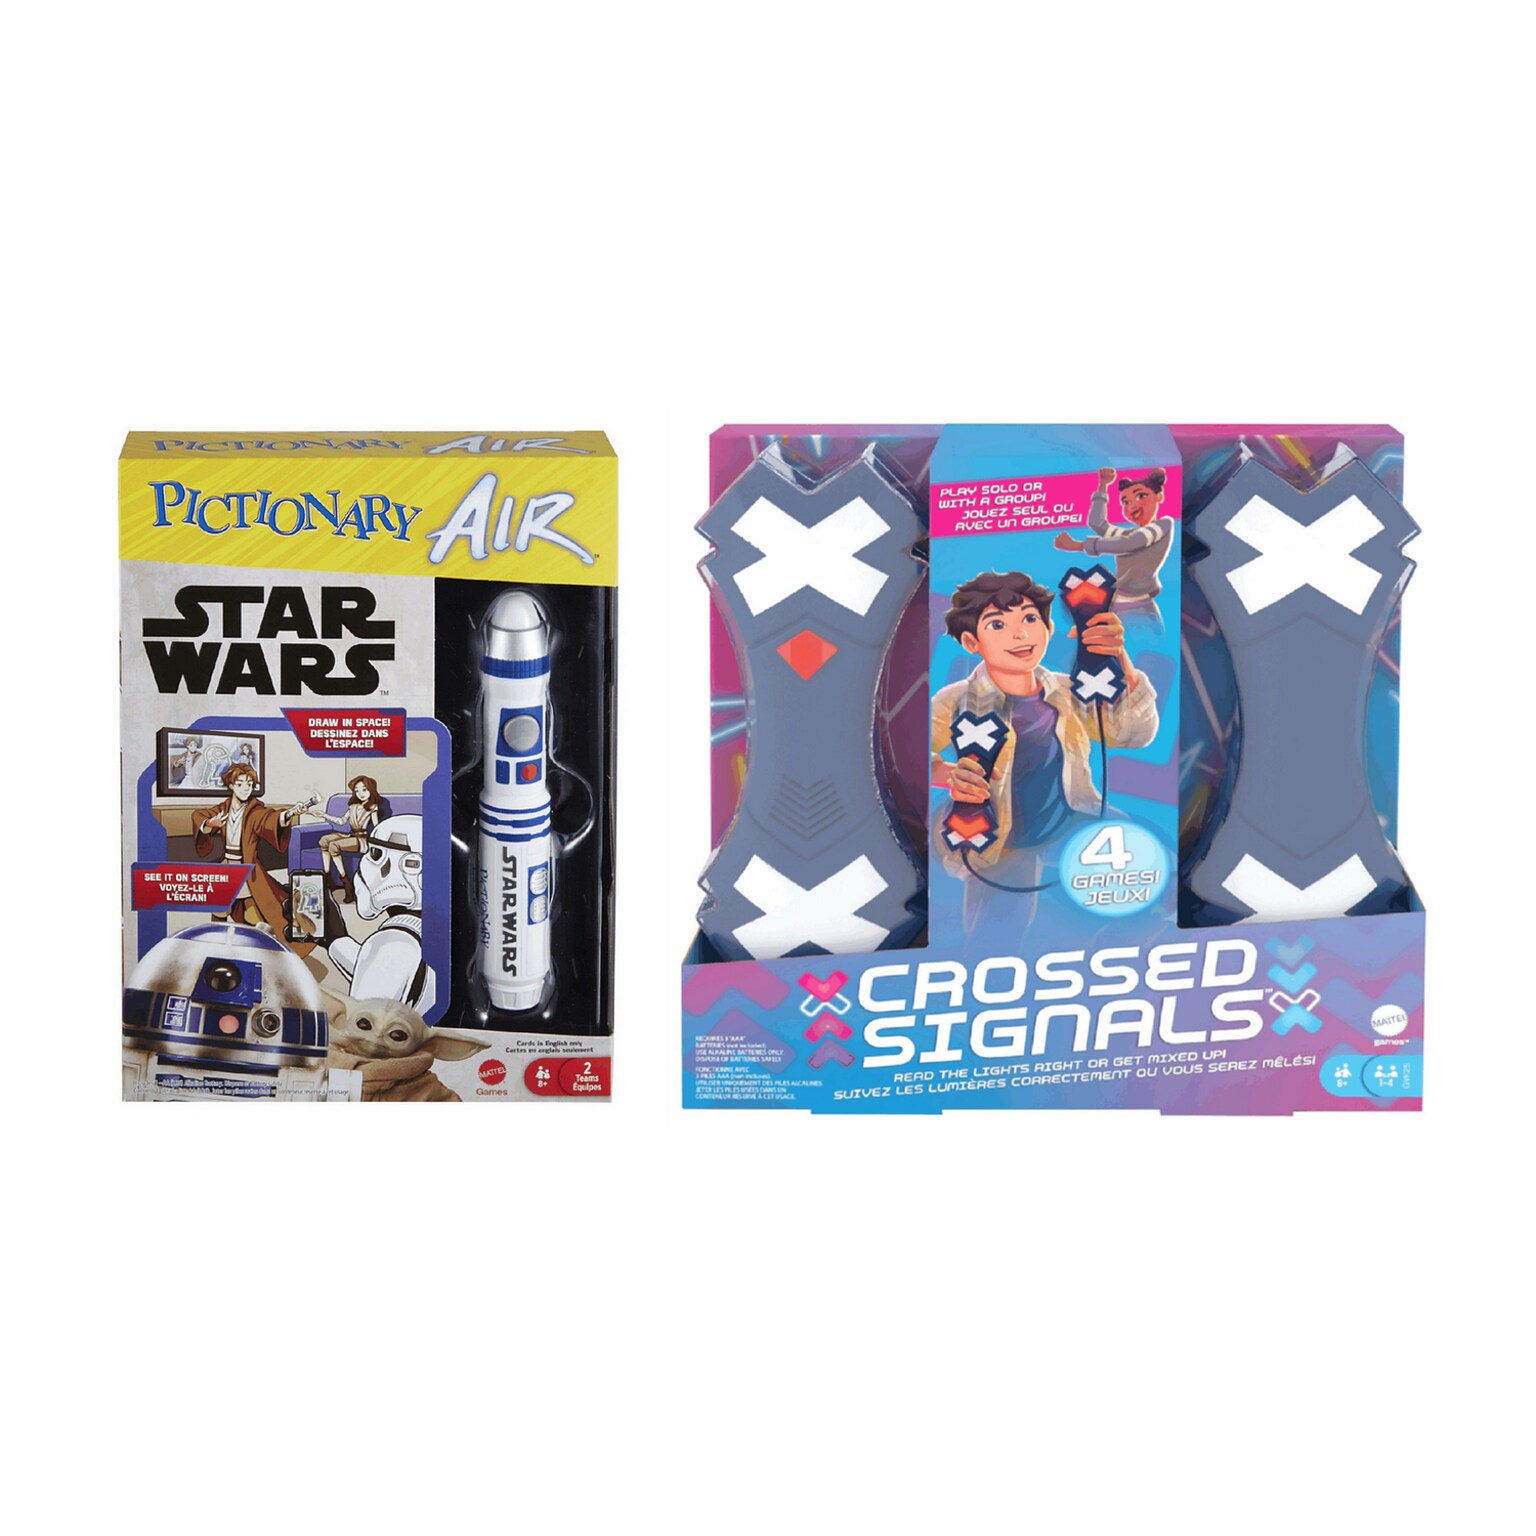 Mattel Game Set: Pictionary Air Star Wars and Crossed Signals